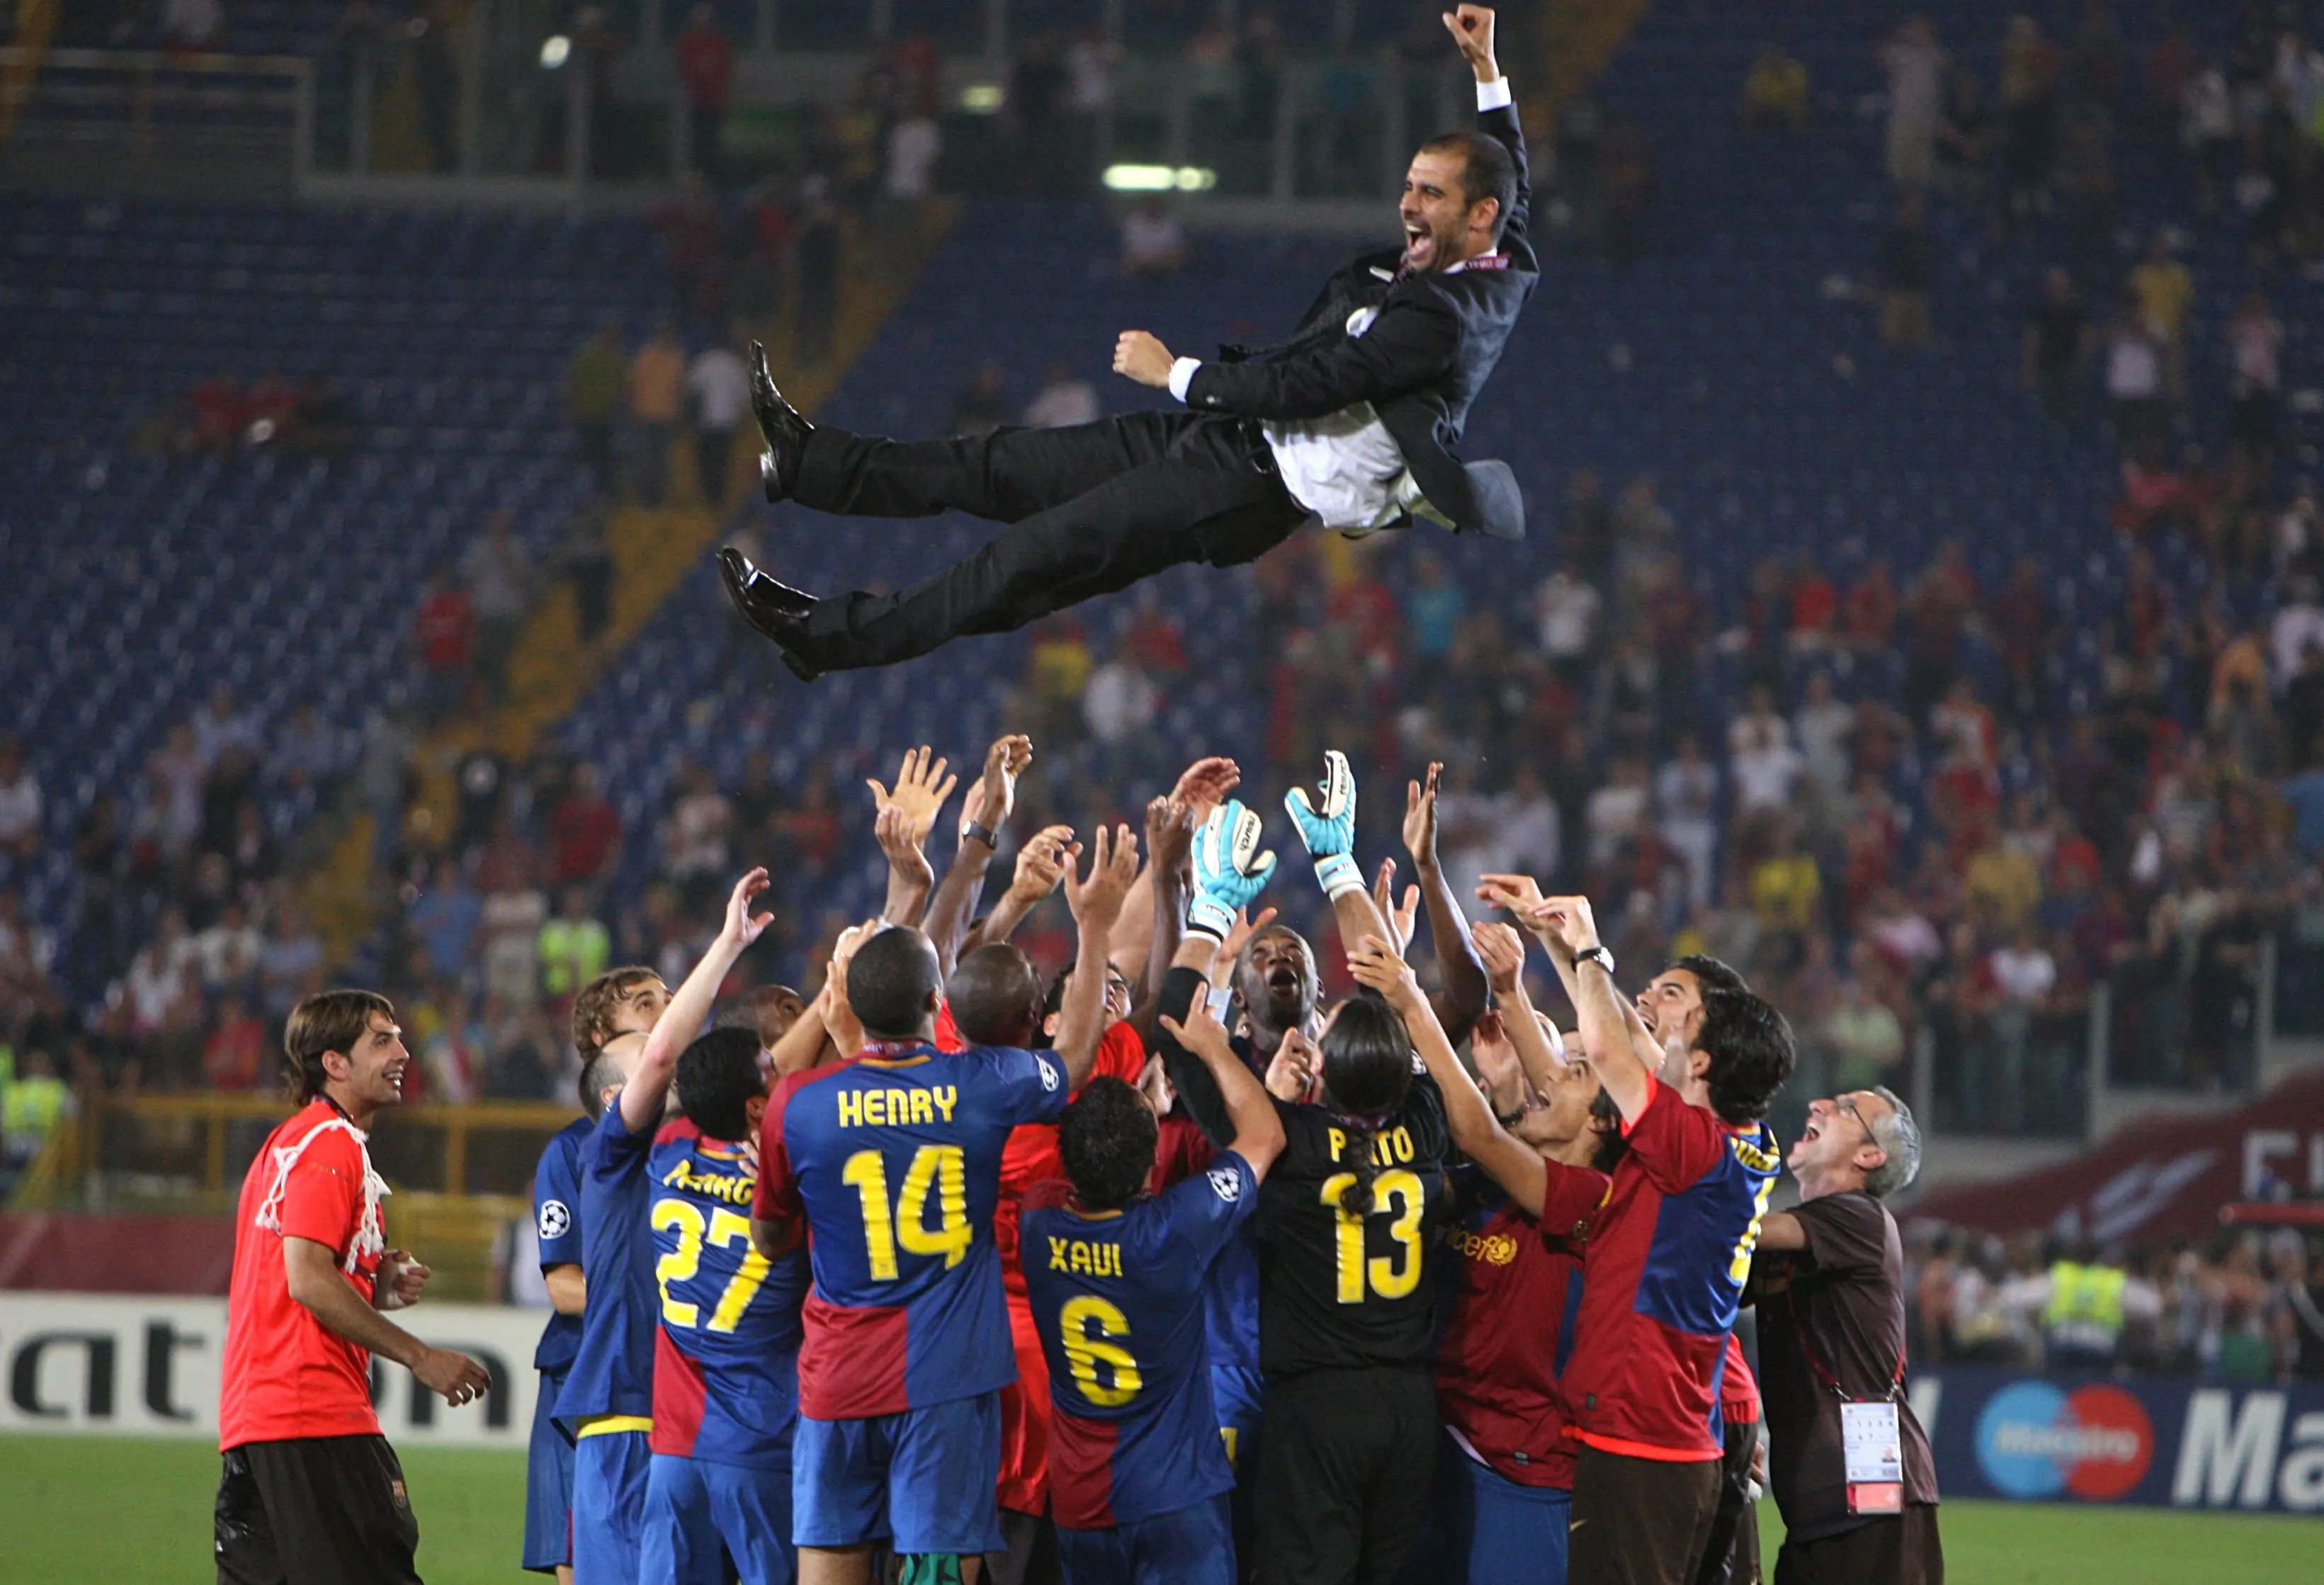 Guardiola is thrown in the air after his first Champions League win as manager. Image: PA Images